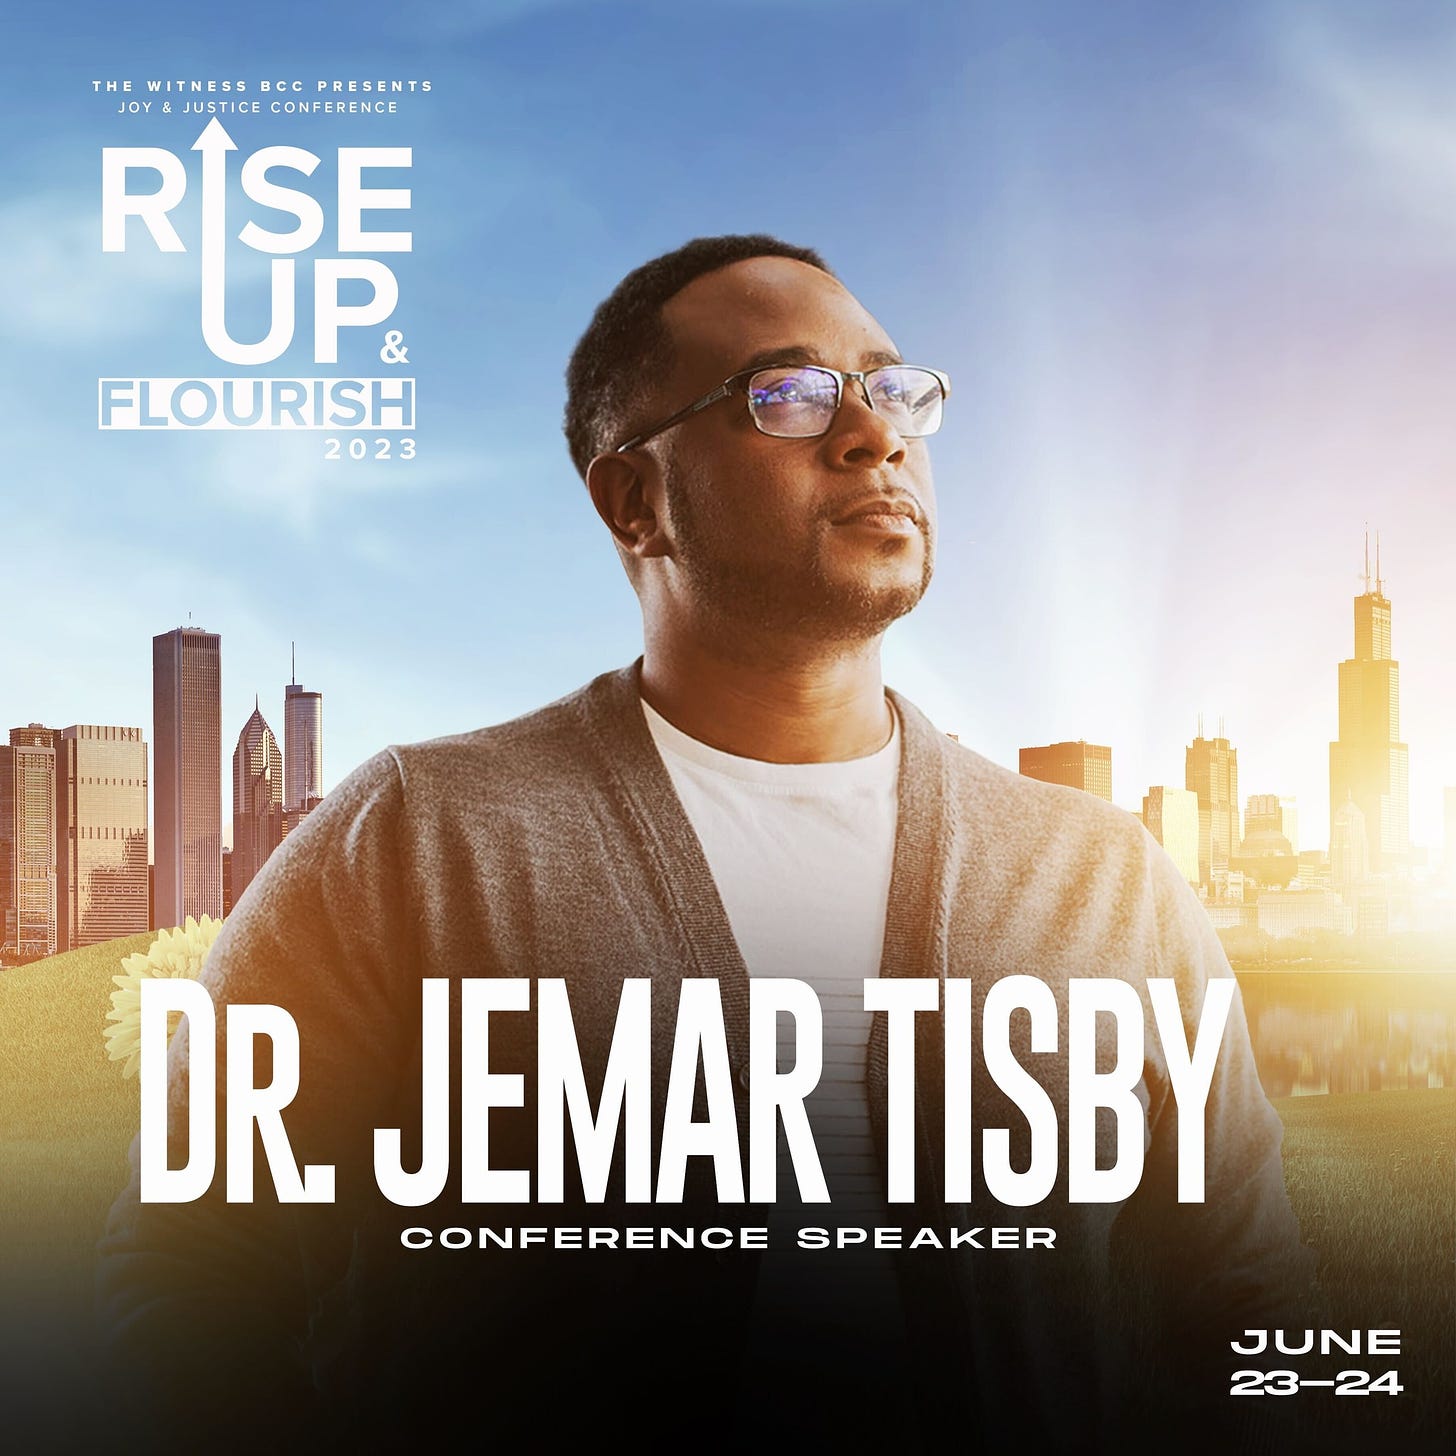 May be a graphic of 1 person and text that says 'WITNESS PRESENTS USTICE CONFERENCE RISE & UP FLOURISH 2023 ....... DR. JEMAR TISBY CONFERENCE SPEAKER JUNE 23-24'